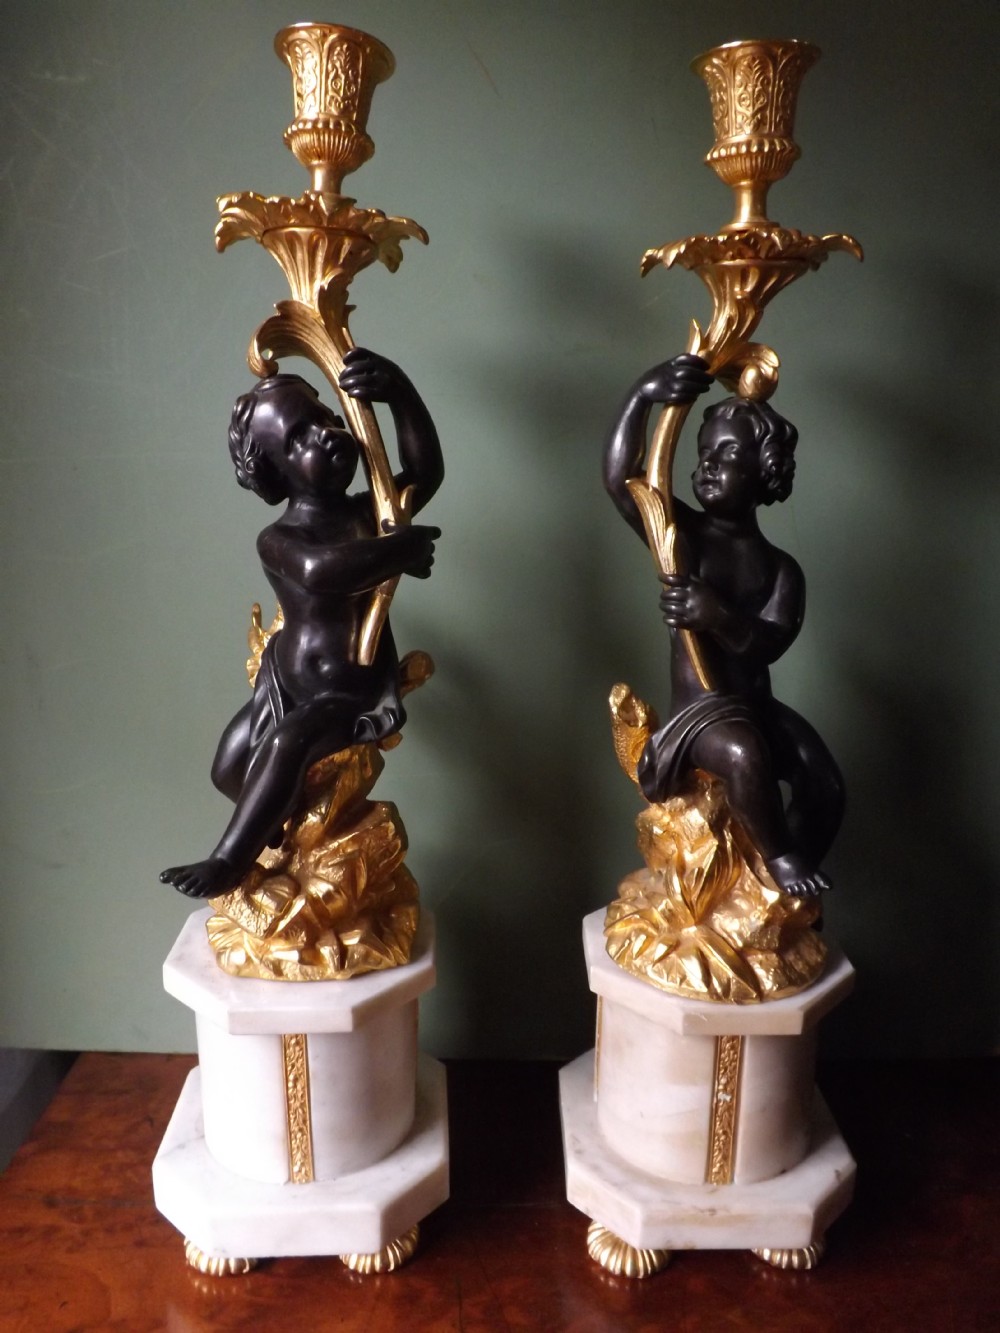 pair of late c19th french bronze and ormolu candlesticks on marble plinth bases